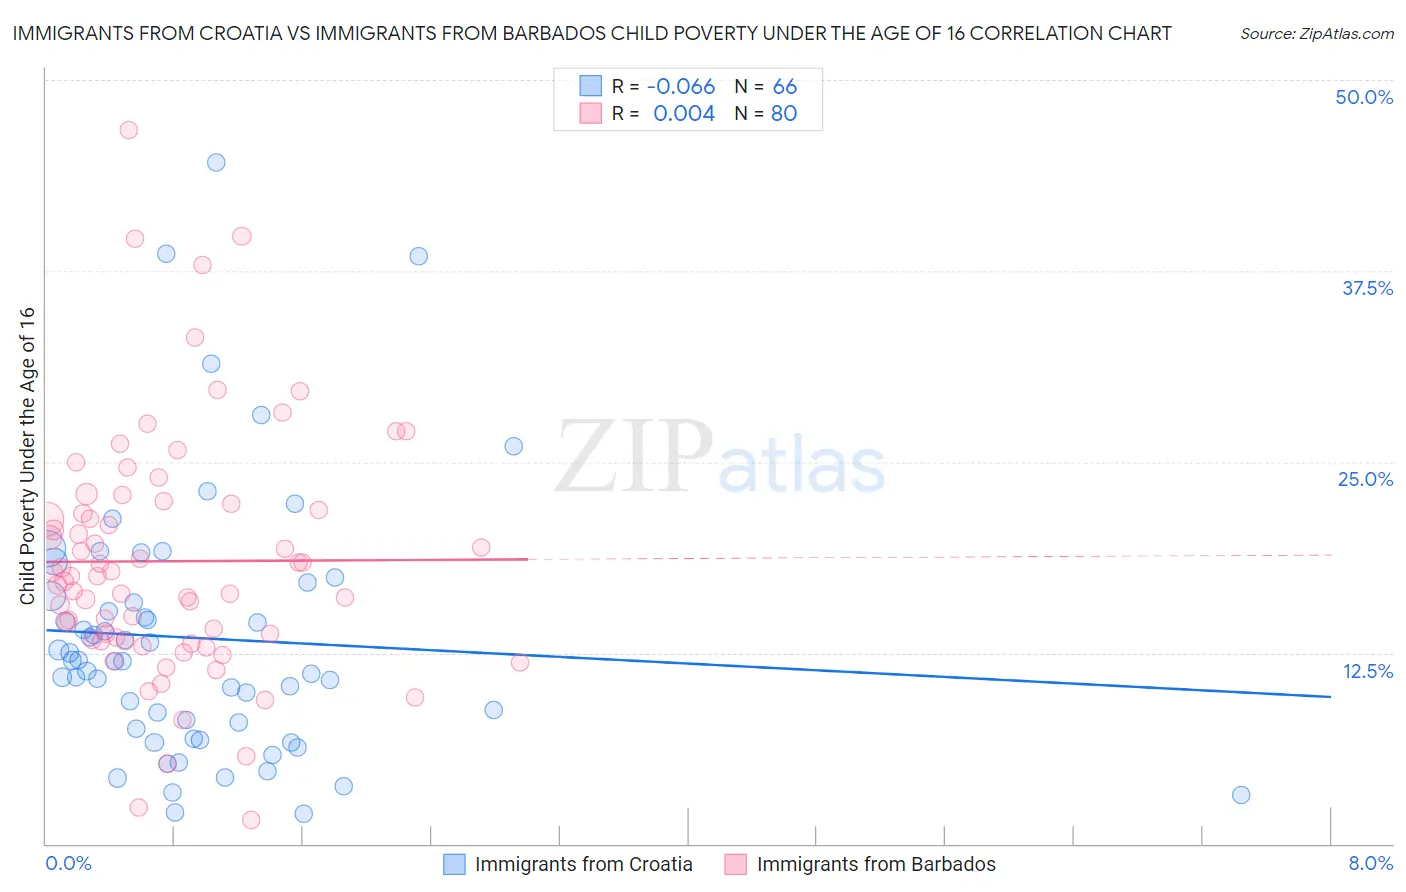 Immigrants from Croatia vs Immigrants from Barbados Child Poverty Under the Age of 16